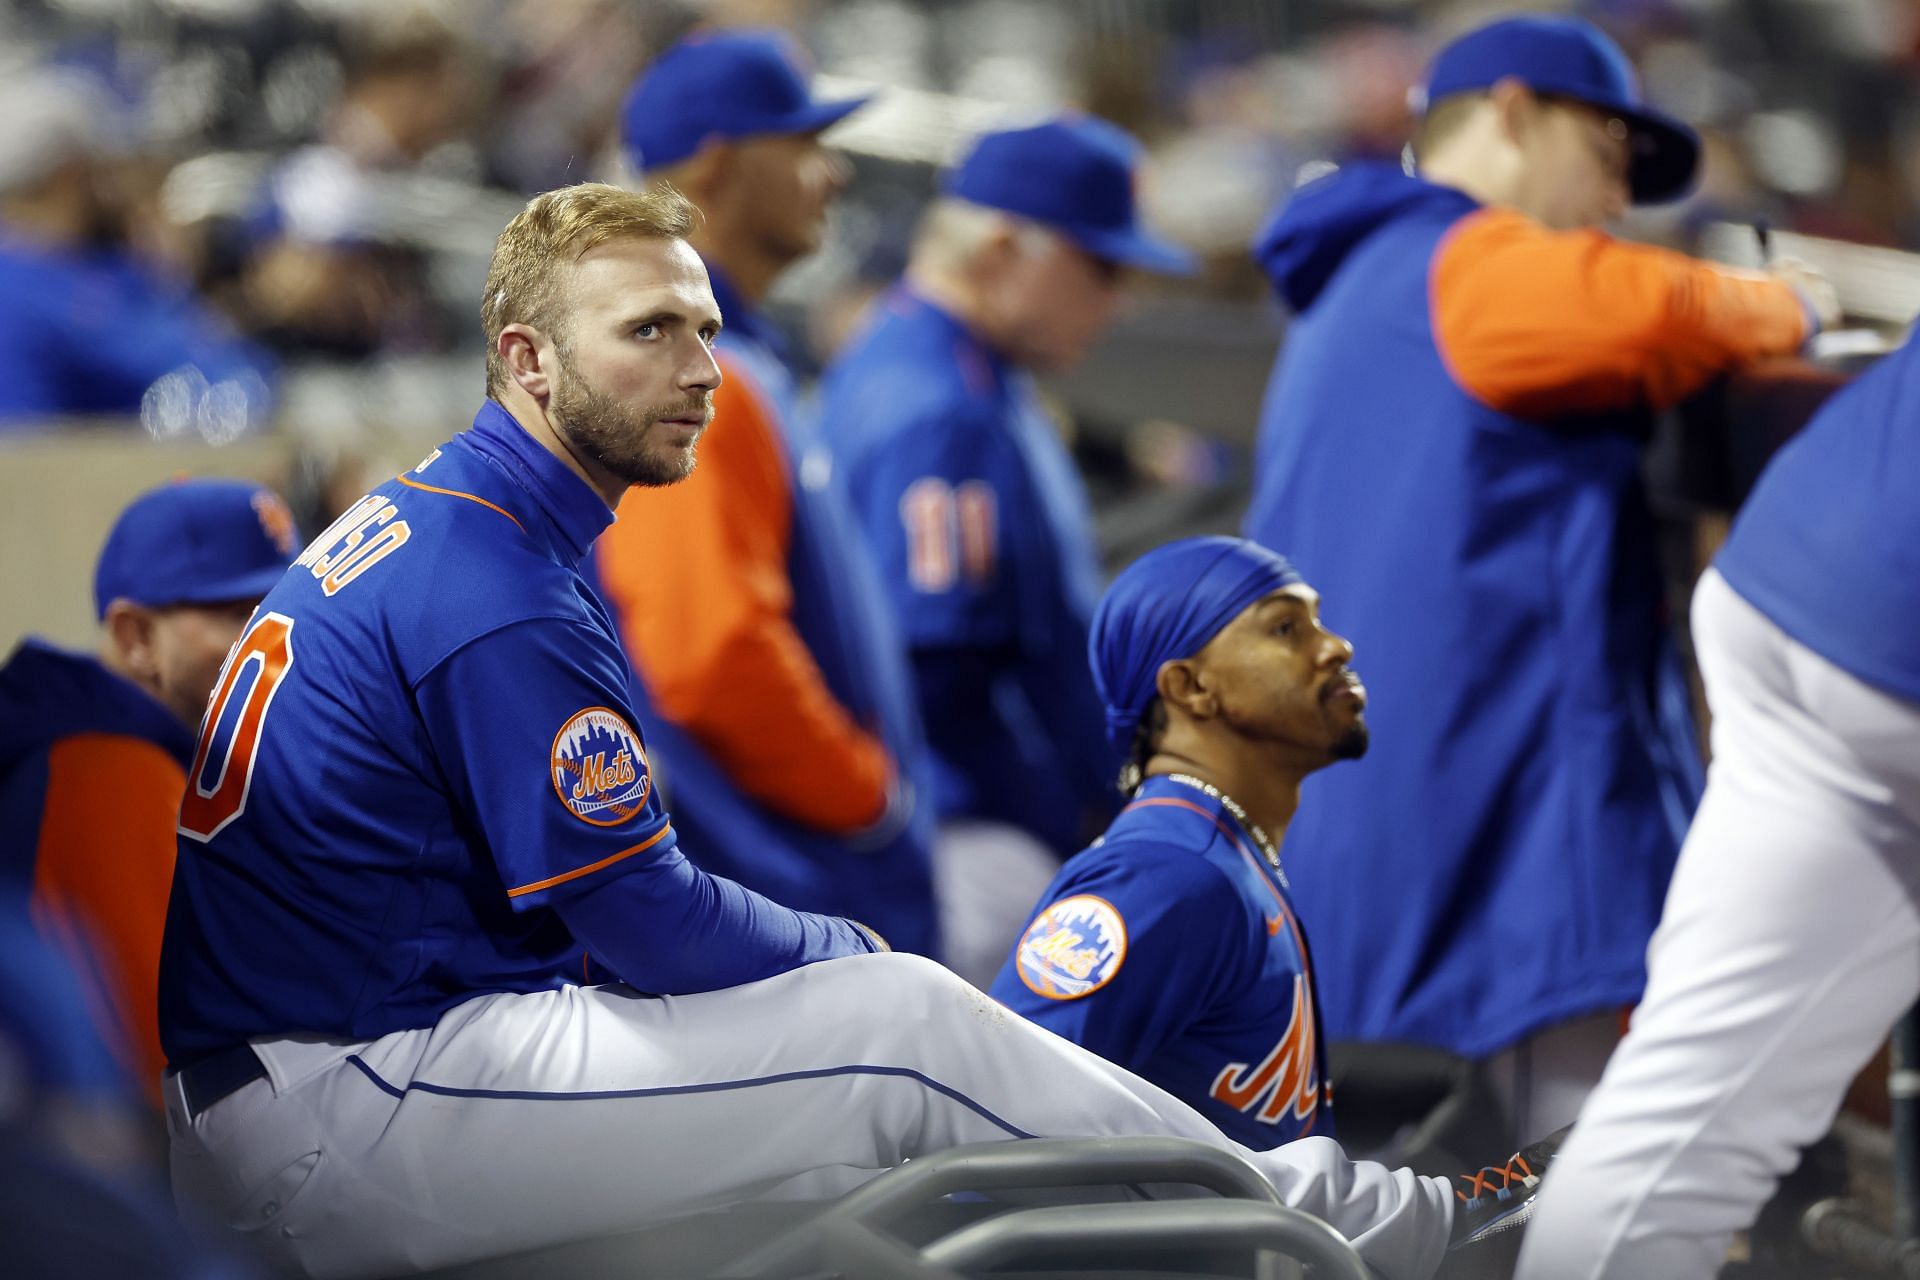 Pete Alonso #20 of the New York Mets reacts in the dugout during the sixth inning